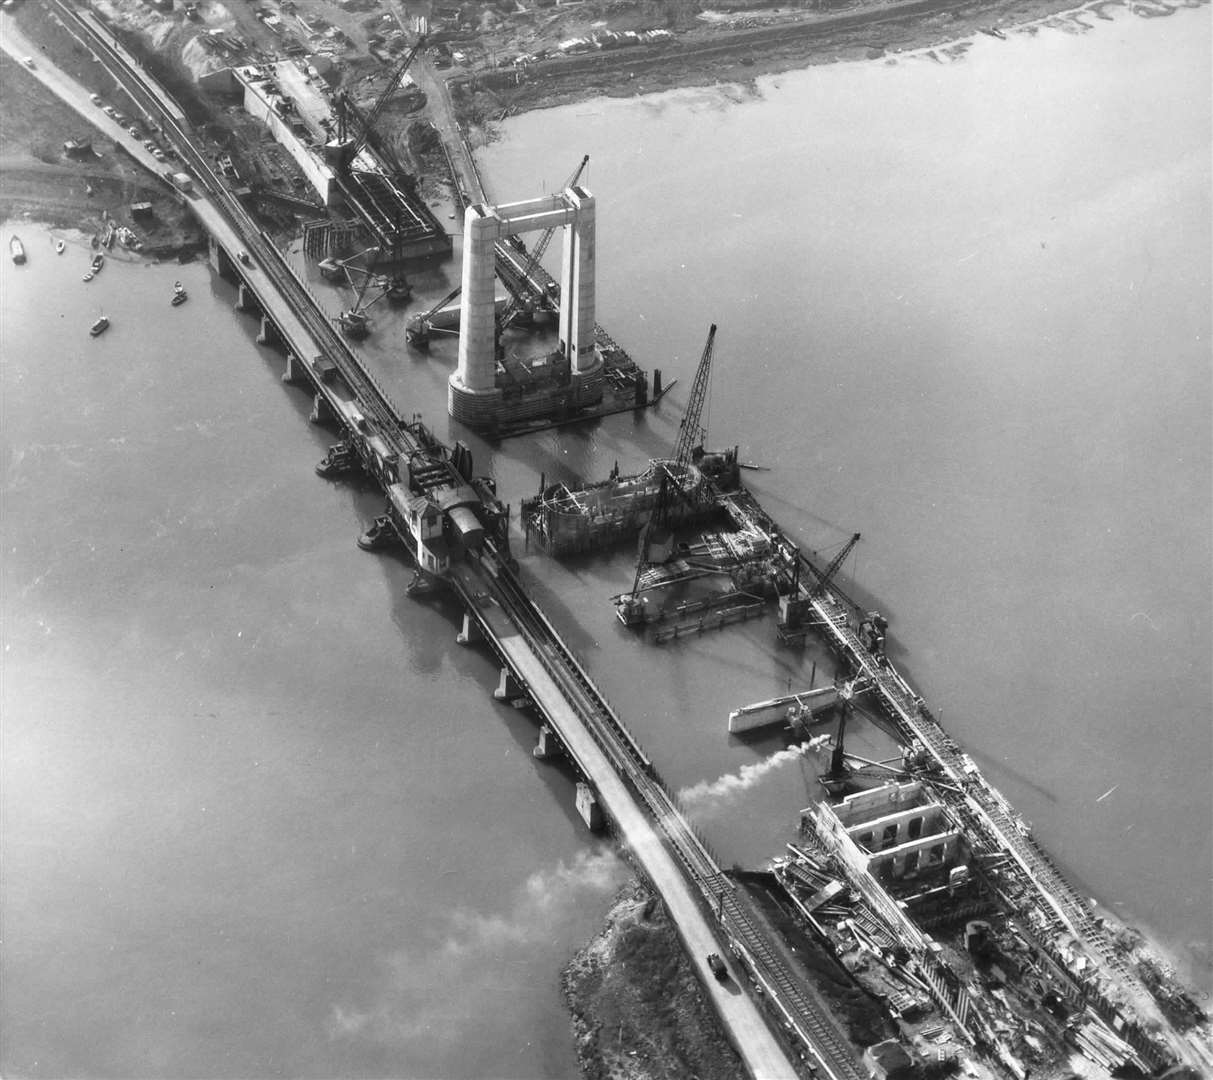 The Kingsferry Bridge project midway through its construction